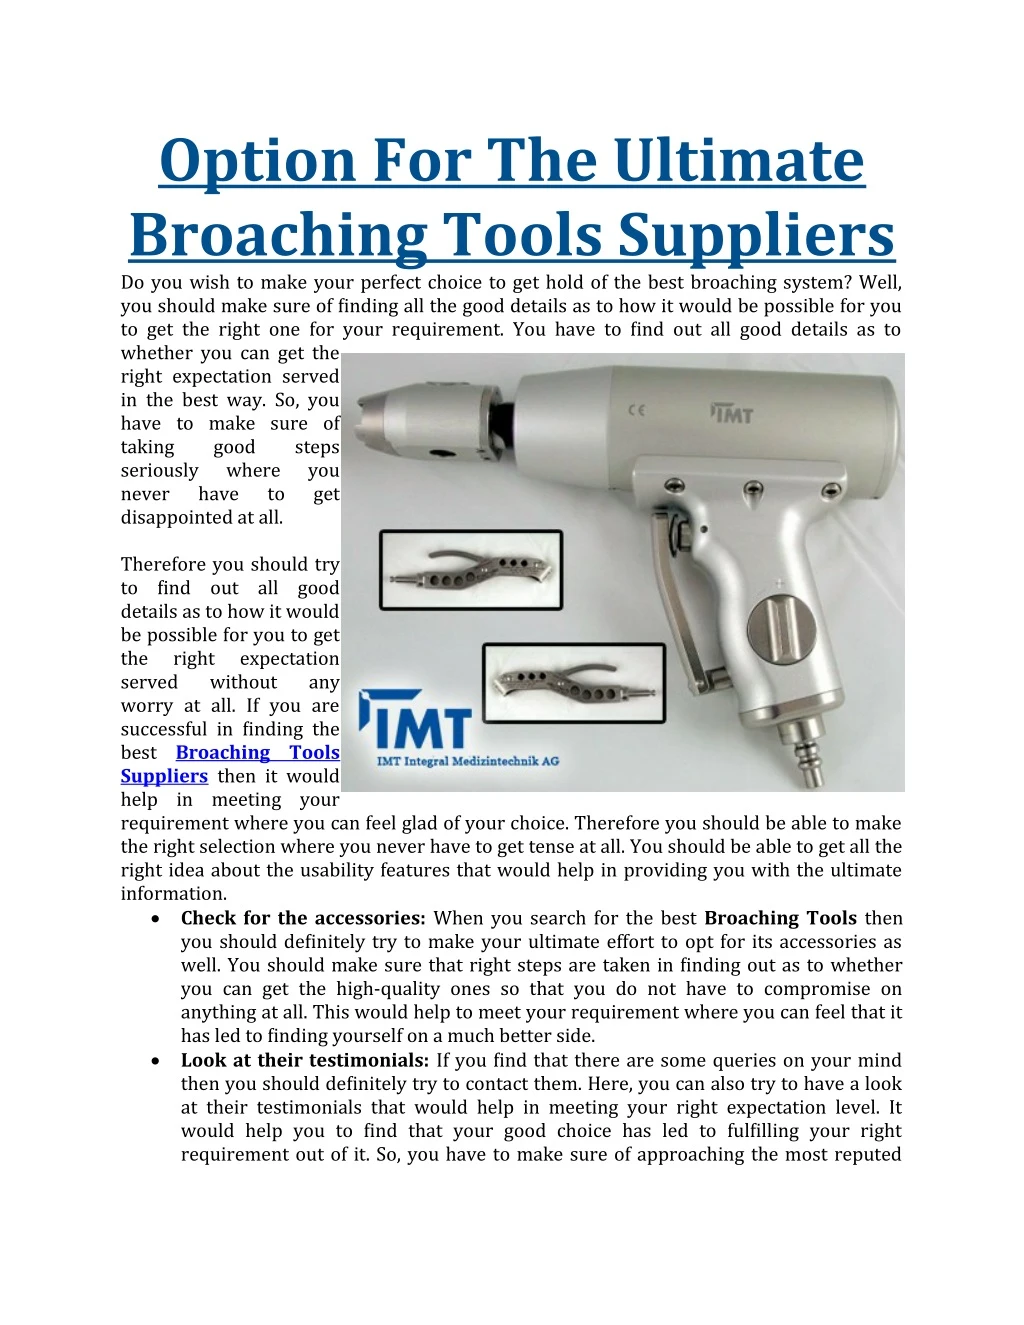 option for the ultimate broaching tools suppliers